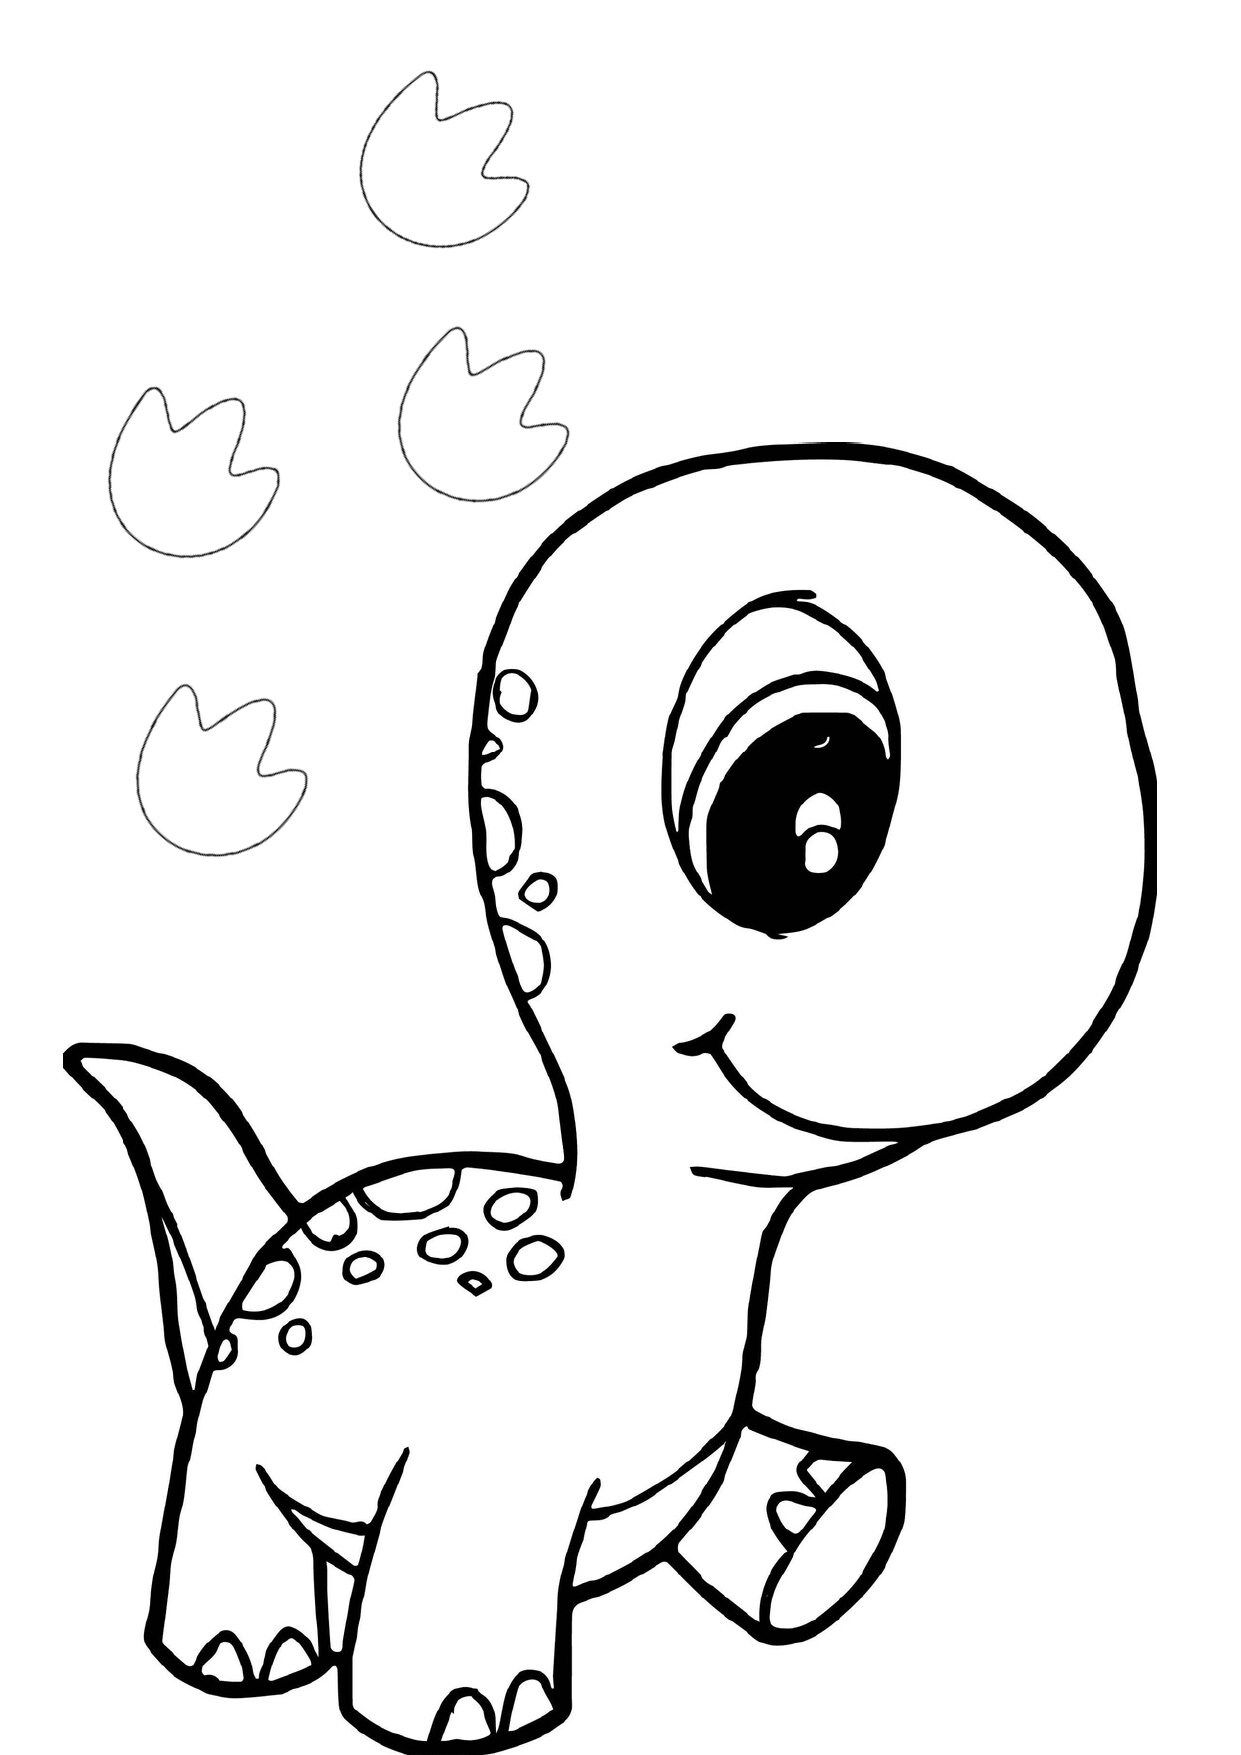 99+ Cute Dinosaur Coloring Pages 37